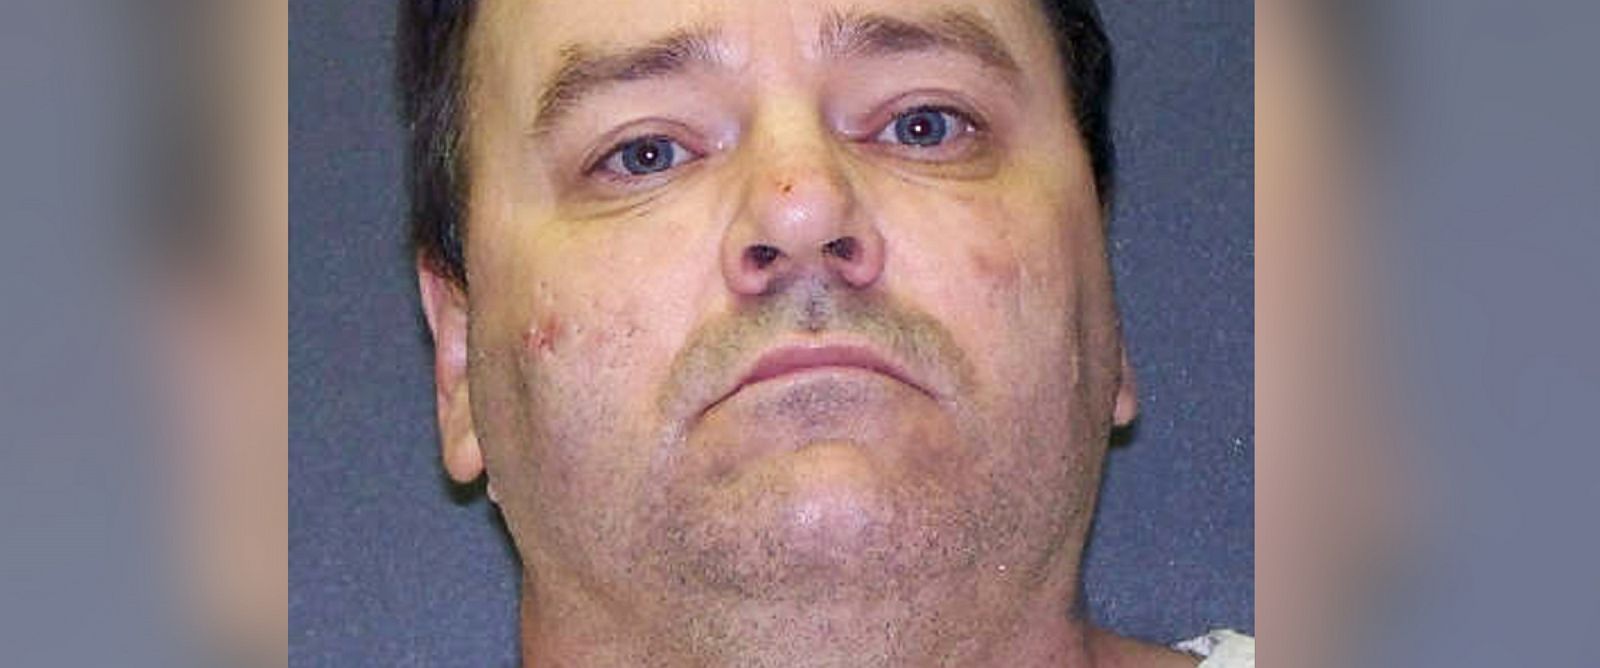 PHOTO: Convicted killer Tommy <b>Lynn Sells</b>, who was executed April 3, 2014, - AP_execution_140403_dg_12x5_1600